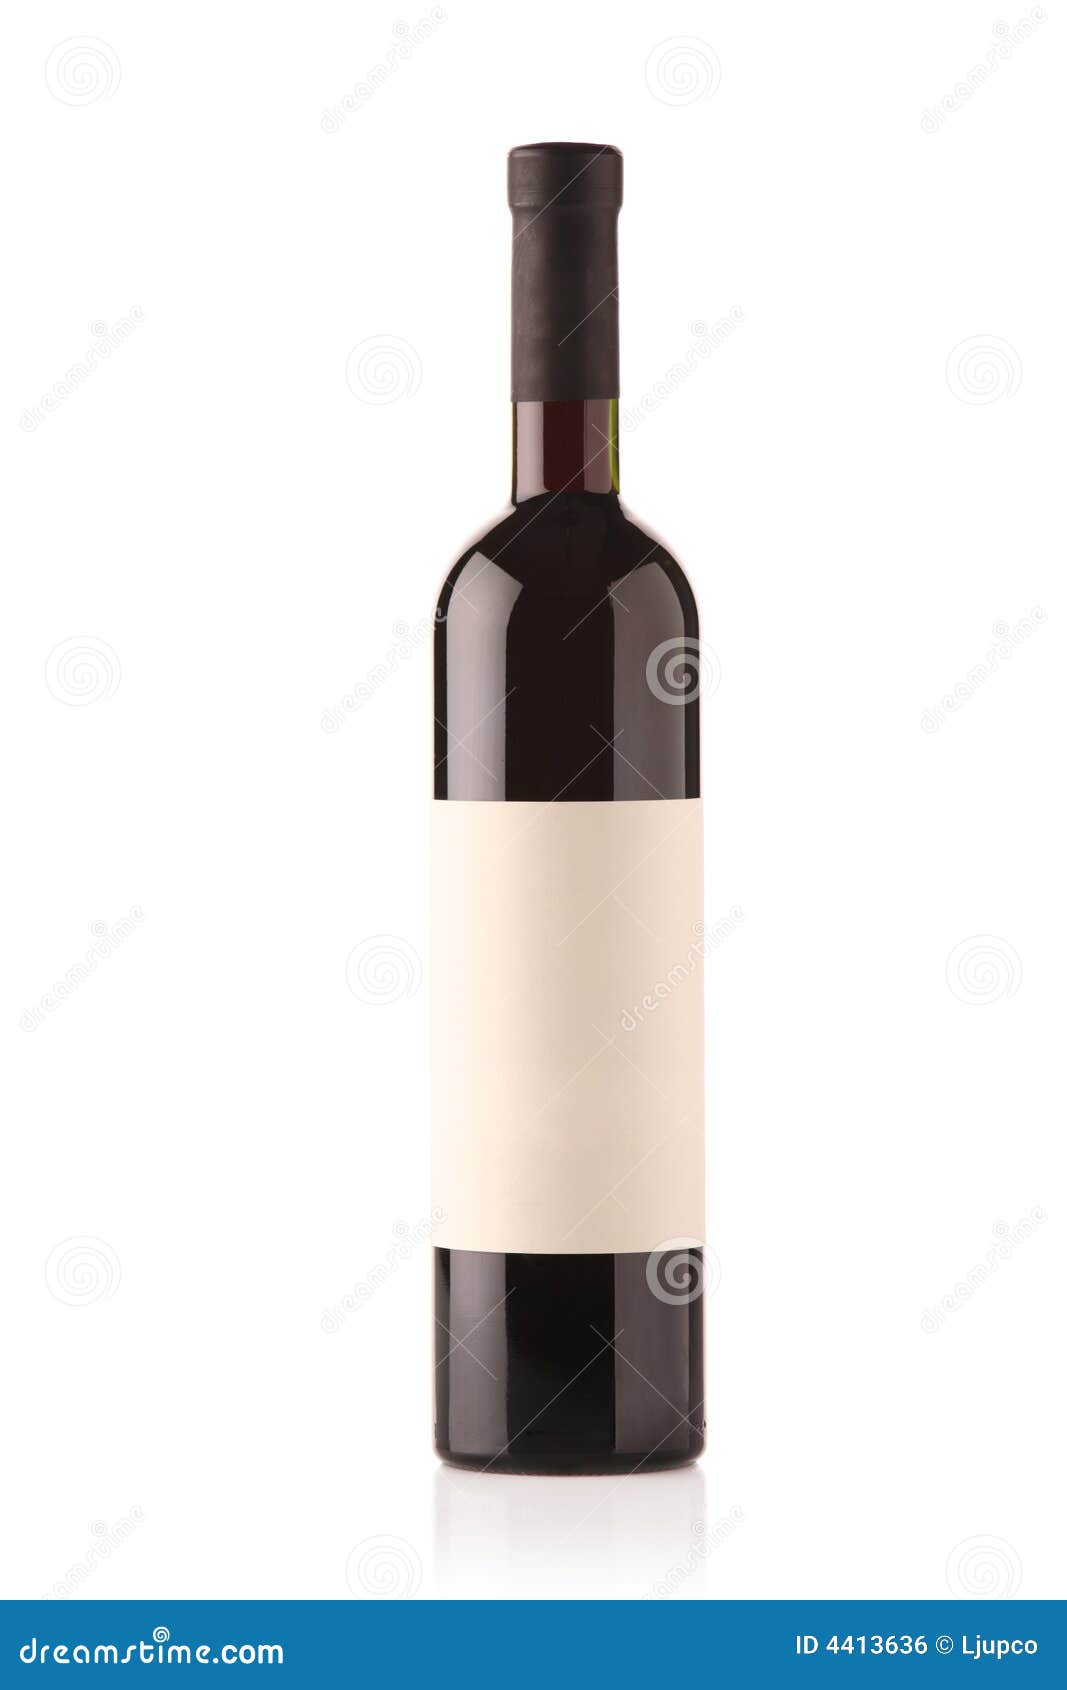 Wine bottle with blank label against white background.